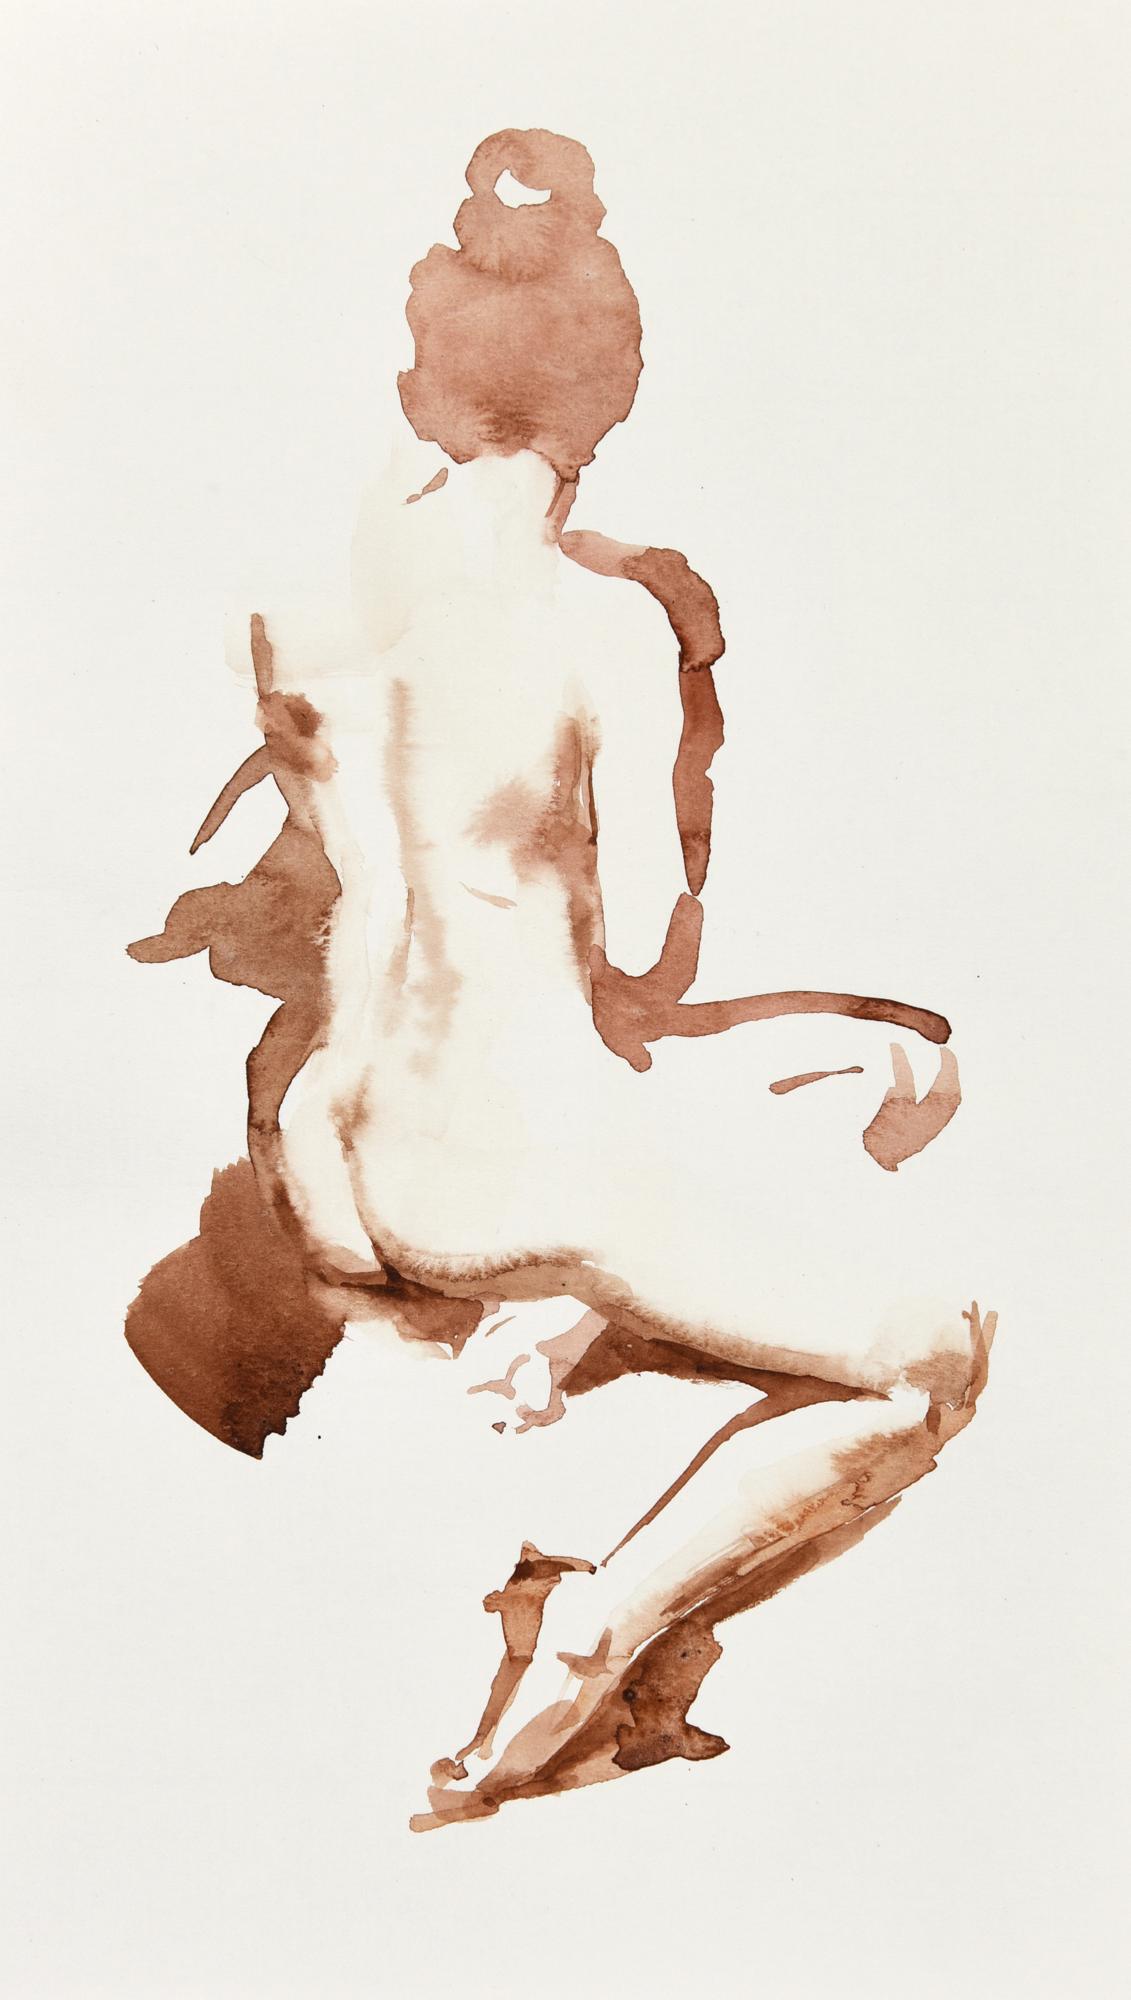 Wendy Artin Figurative Art - "Taylor Sitting" sepia watercolor gesture painting of a nude figure from behind